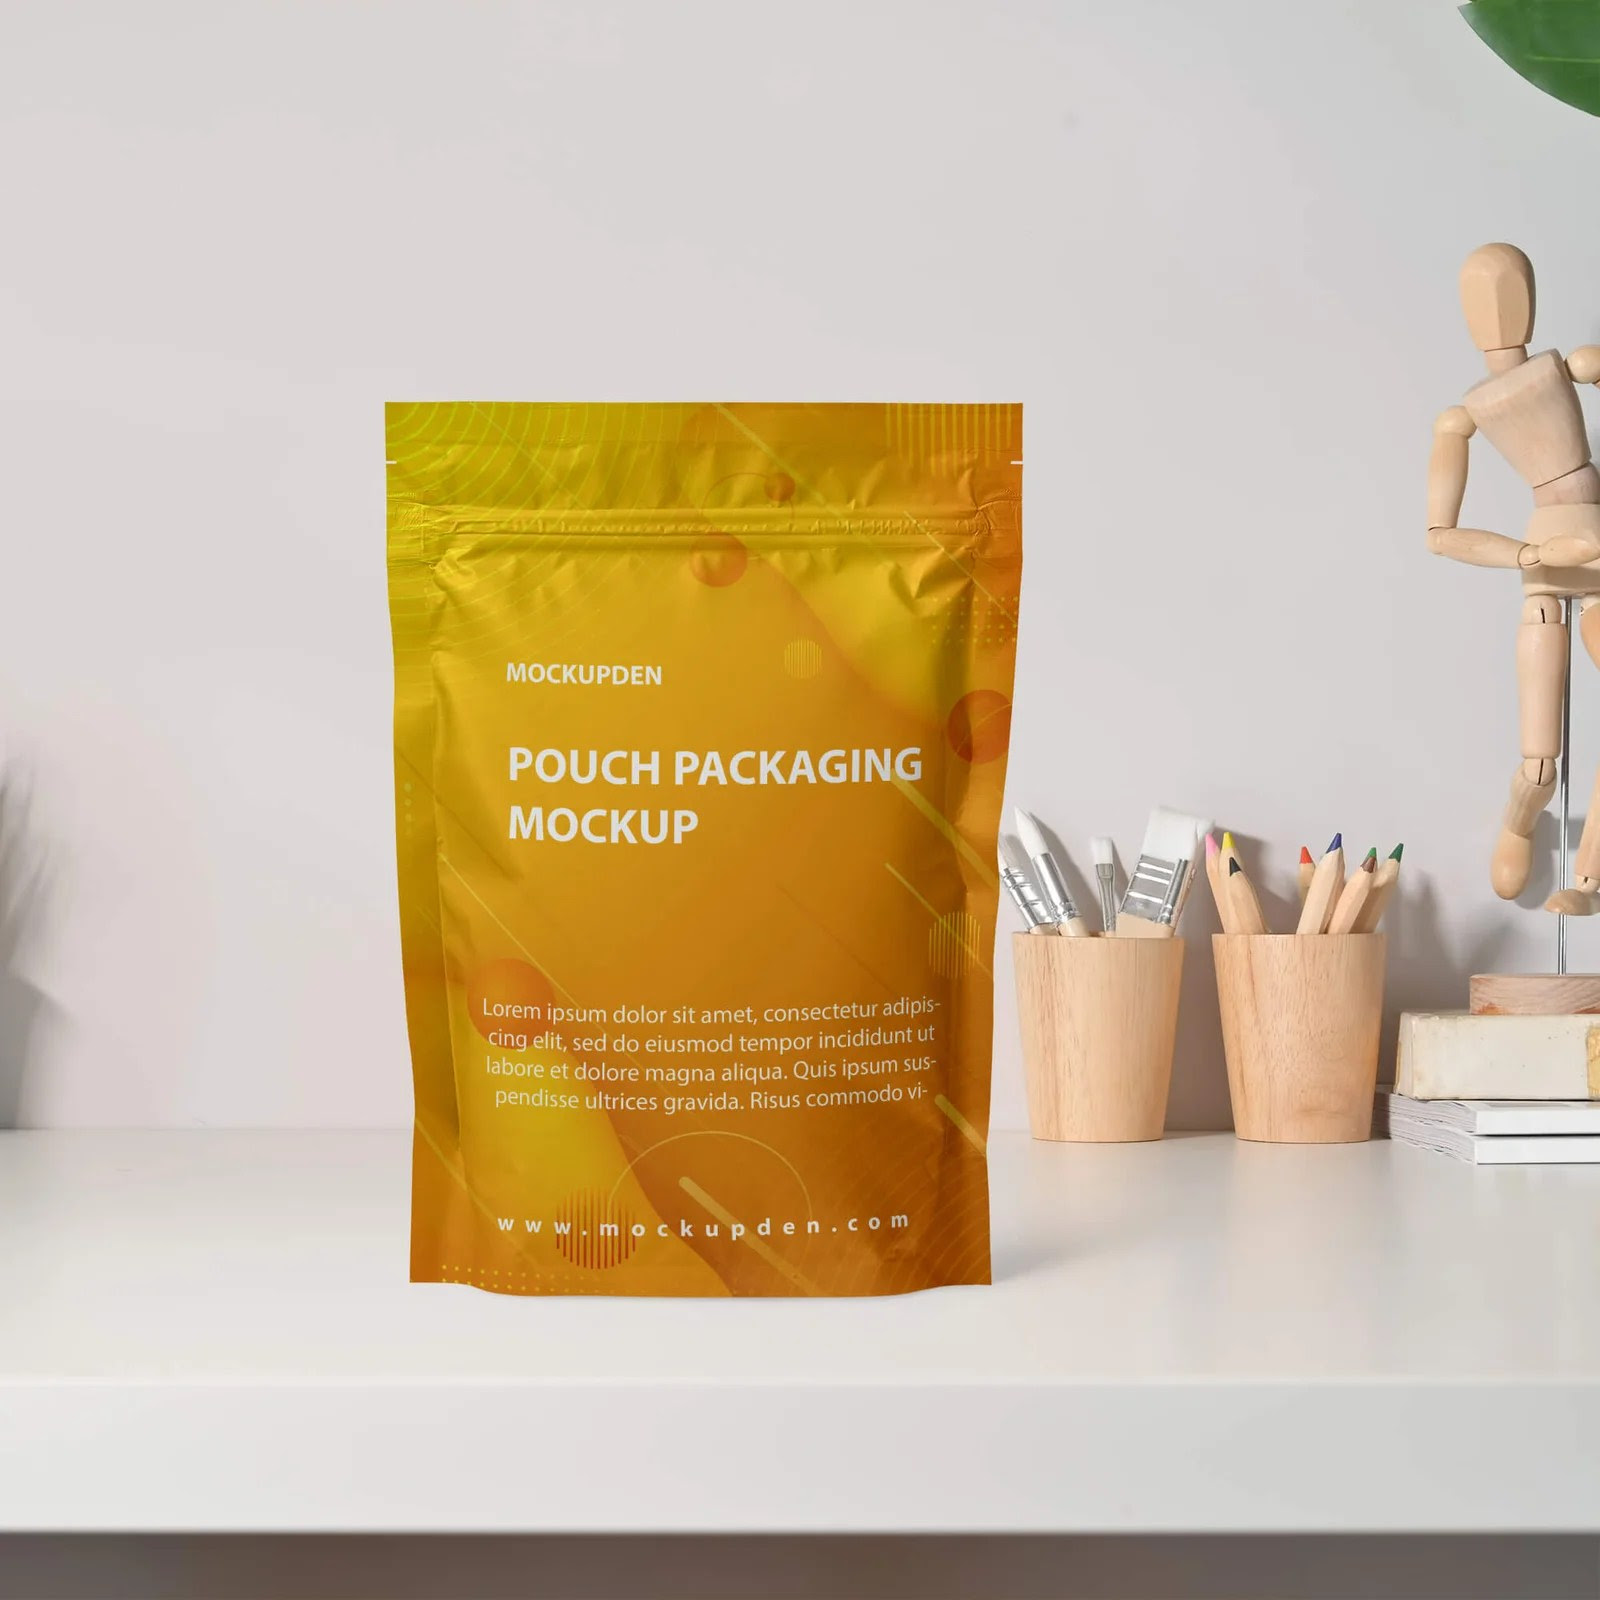 Free Pouch Packaging Mockup PSD Template Mockup Den